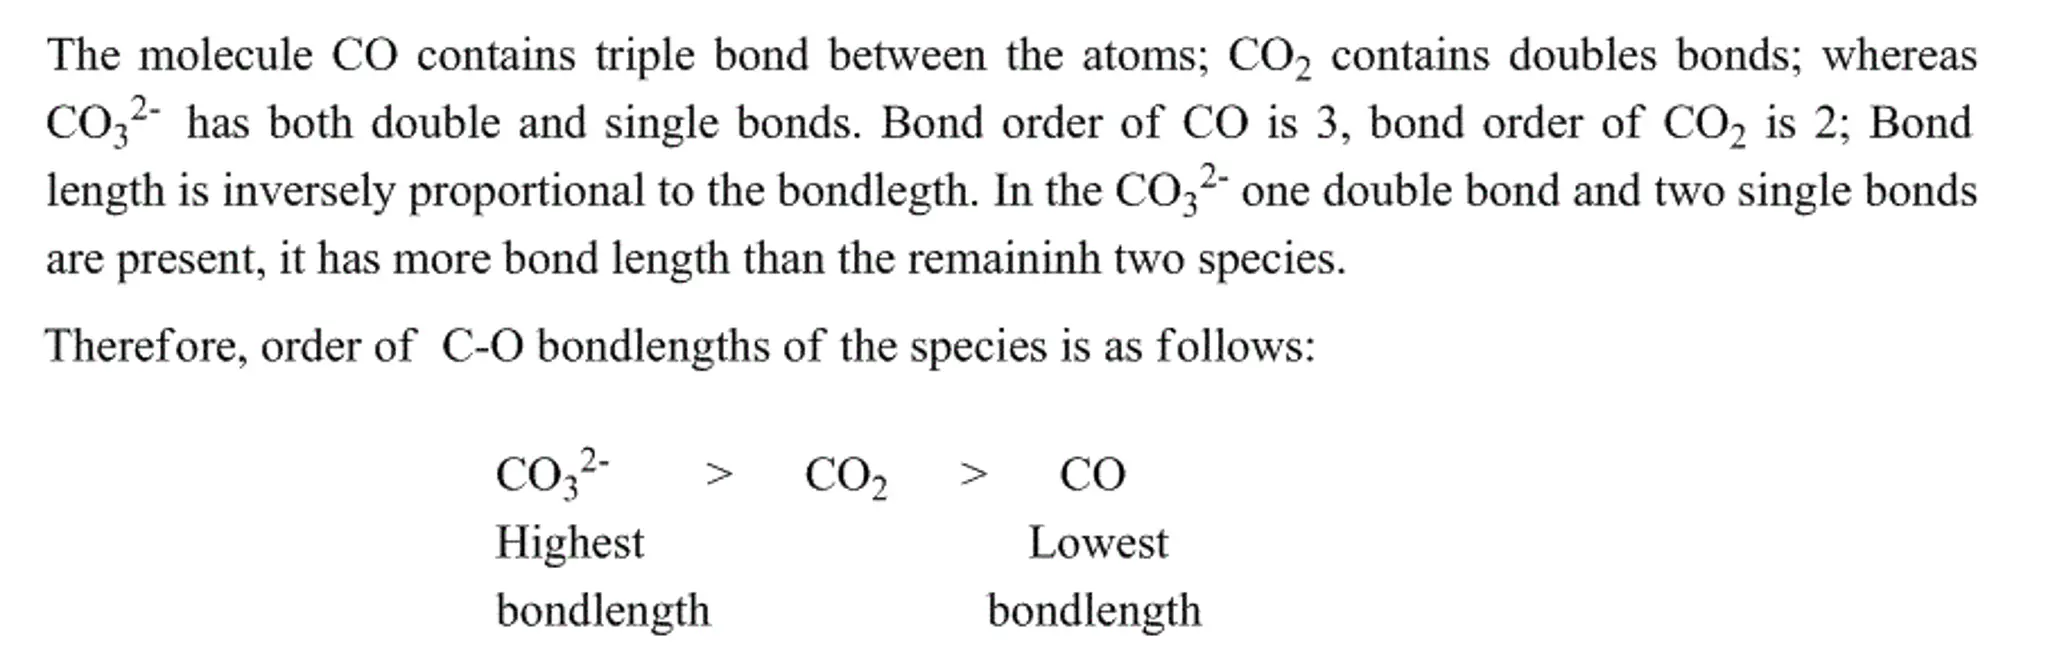 predicting the ordering of the C-O bond lengths inCO,
CO2,
and CO32- .
I appreciate it .

for CO the Lewis
structureis :C≡ O:
for CO2 the Lewis structureis 
::O=C=O::
for CO32- the Lewisstructure
is [::O=C|O:::-O:::]2-
sorry this is a baddrawing.. but you got the
picture. 
but how do I predict the ordering of the C-O bond lengths in
CO, CO2, andCO32-